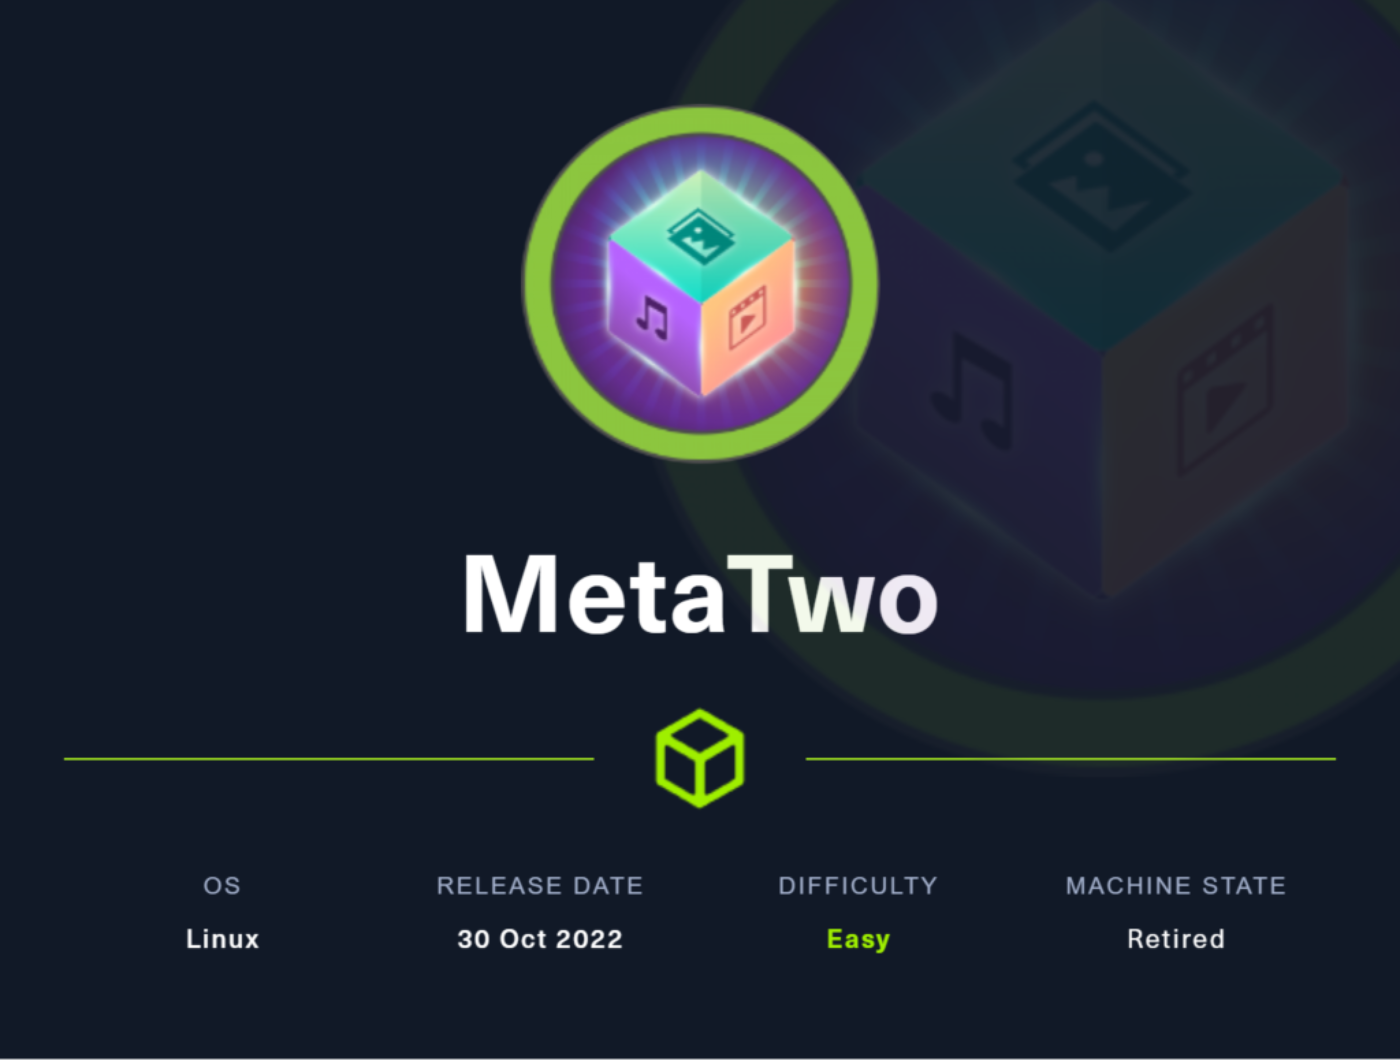 Writeup of MetaTwo from HackTheBox